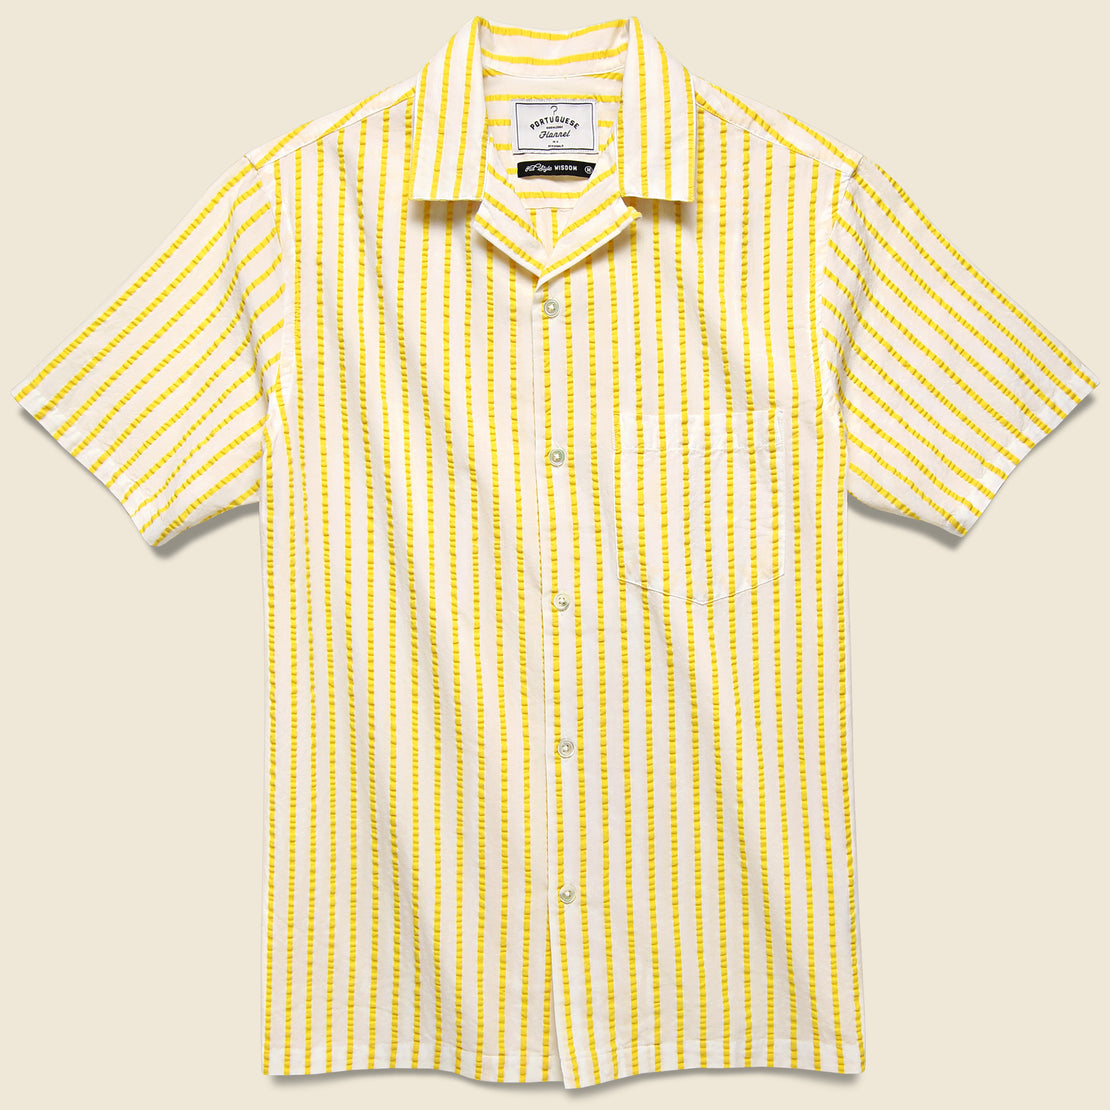 Portuguese Flannel Rayures Camp Shirt - White/Yellow